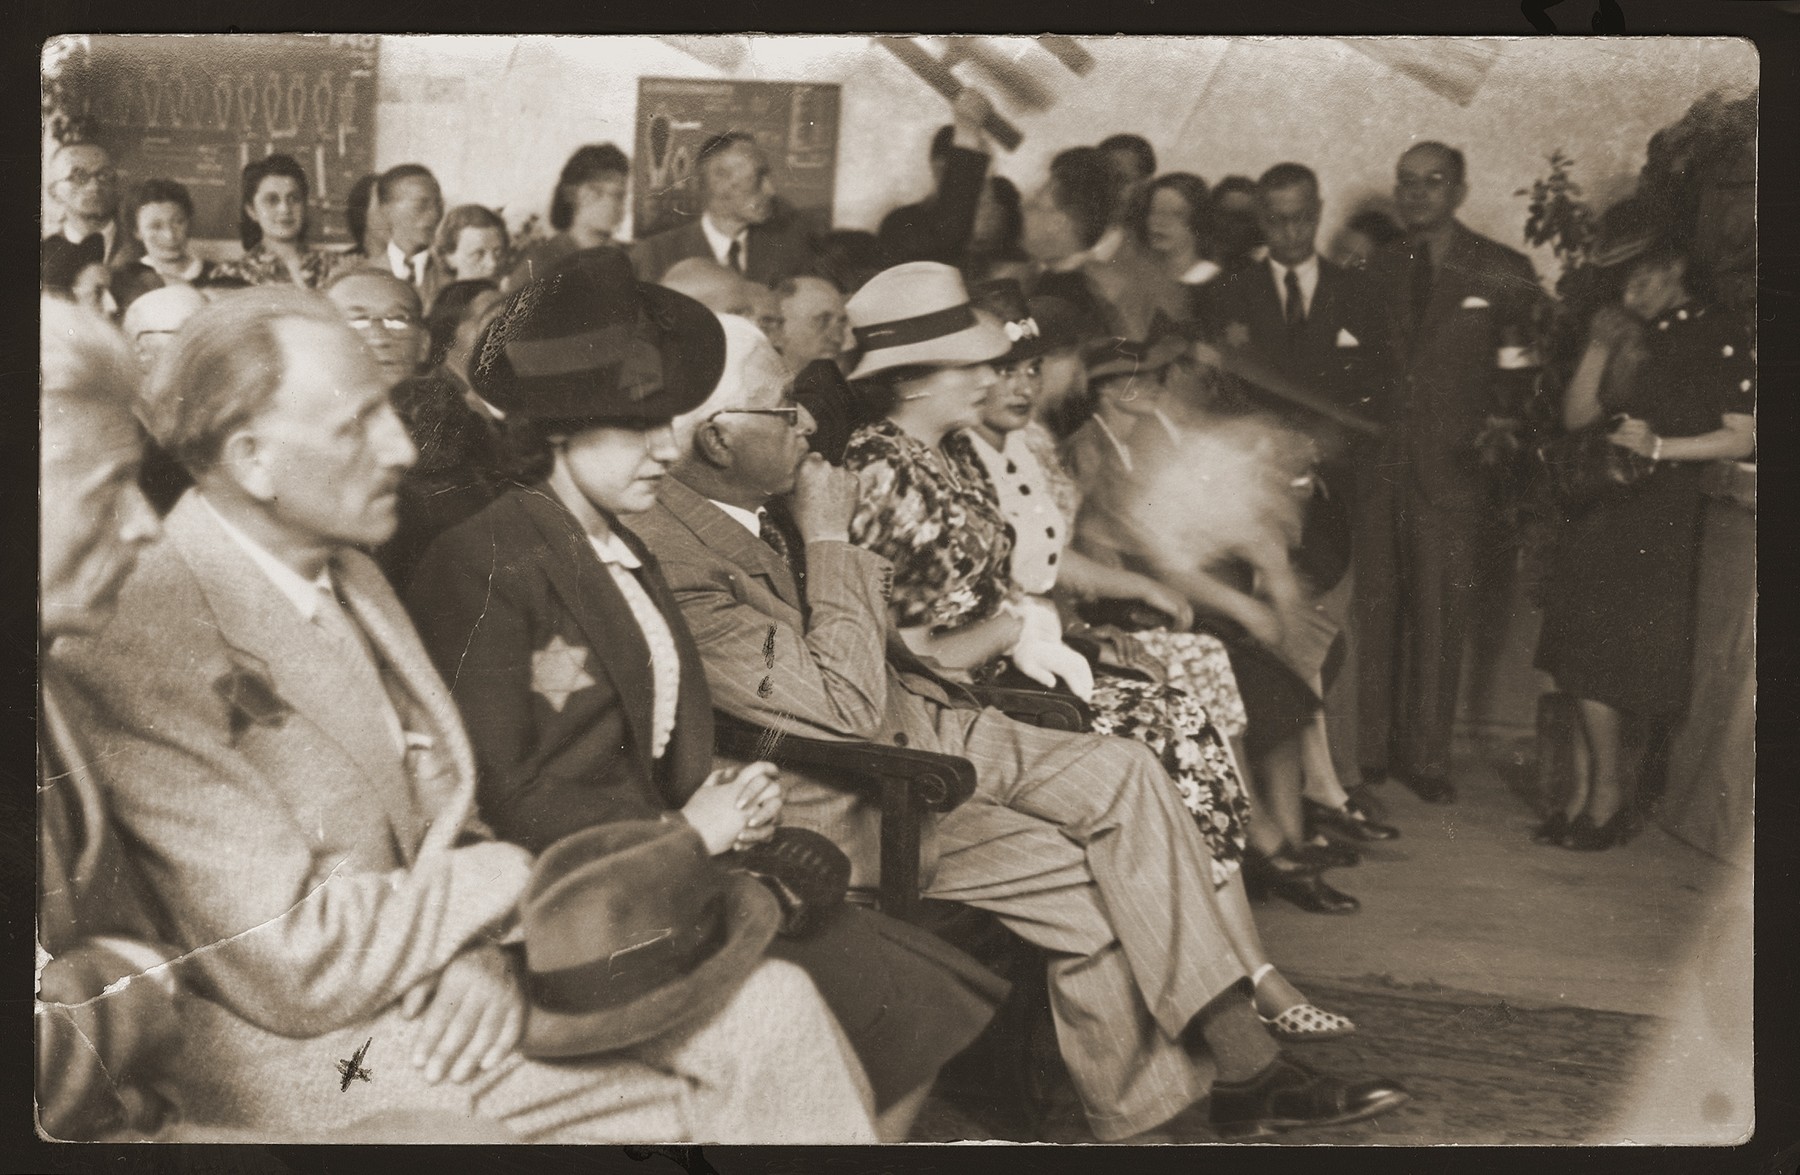 Jewish council chairman Mordechai Chaim Rumkowski (fourth from the left), attends a ceremony in the Lodz ghetto.  

Also pictured are Dora Fuks (third from the left) and Dr. Michal Eliasberg (second from the left).